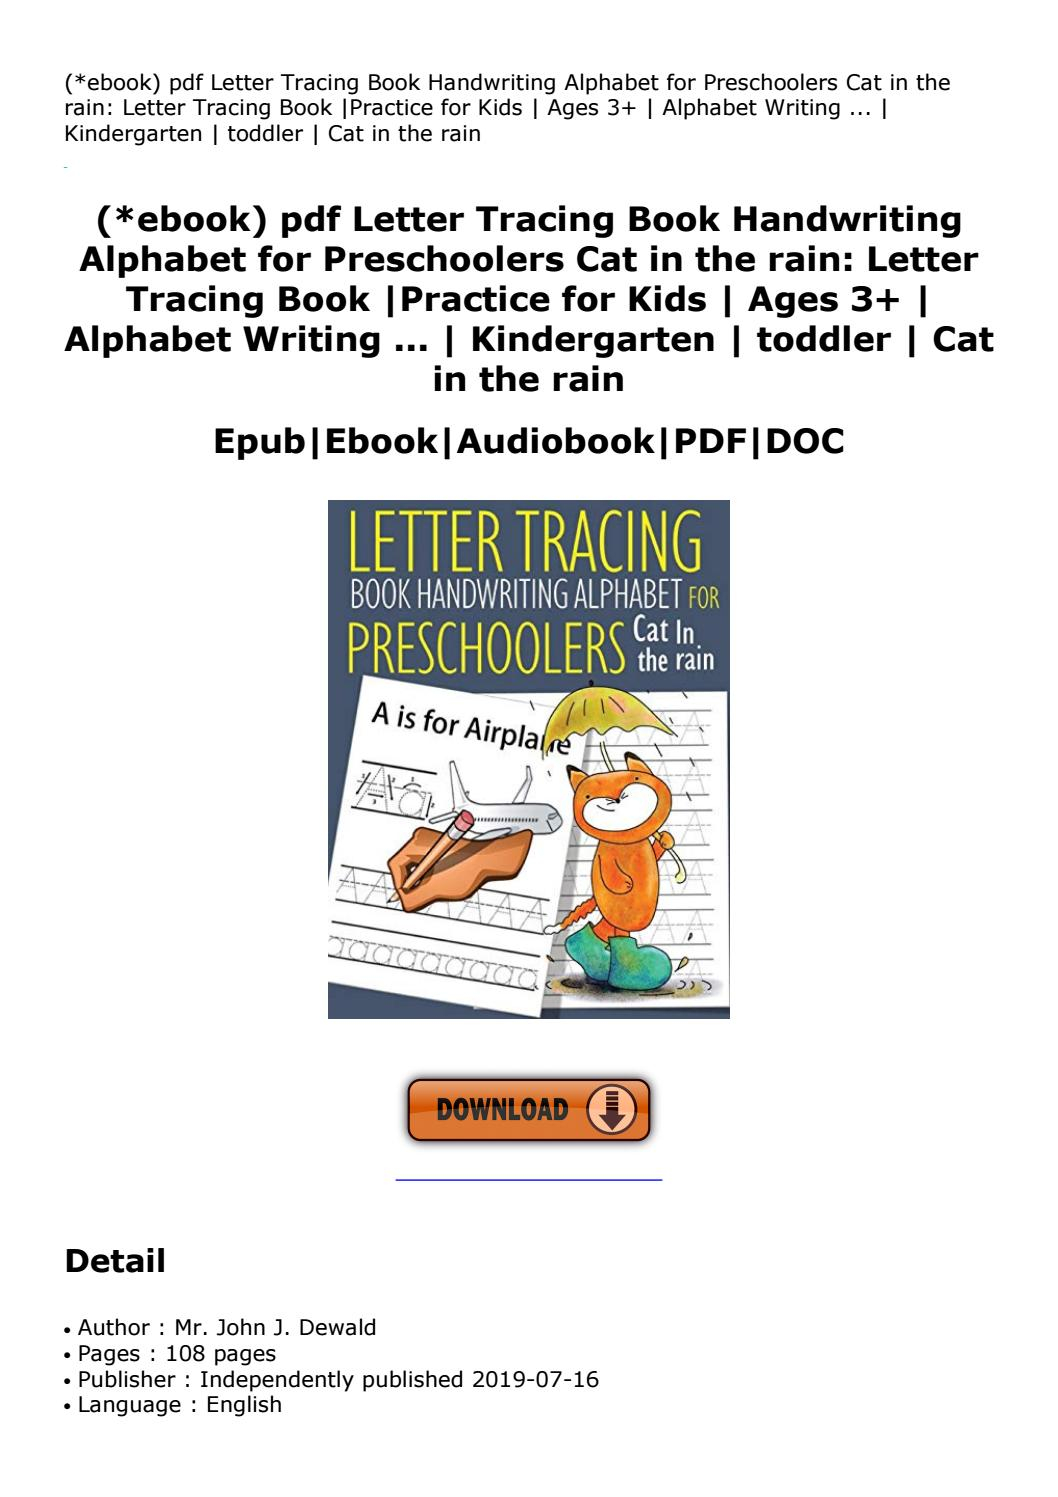 Ebook) Pdf Letter Tracing Book Handwriting Alphabet For